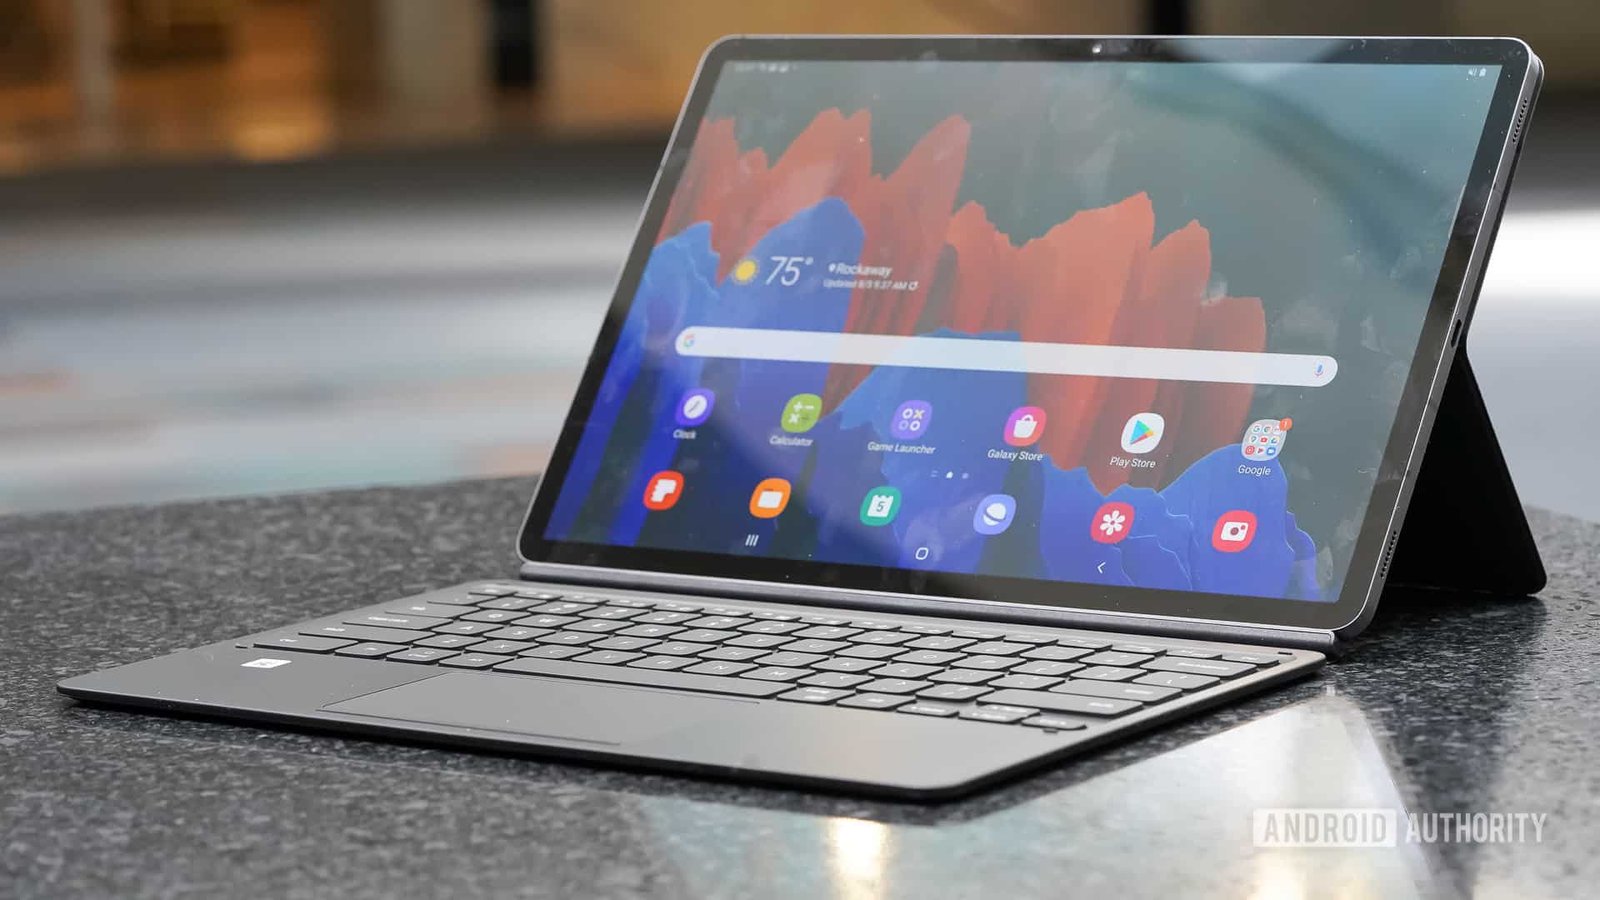 Google has high hopes for Android Tablets